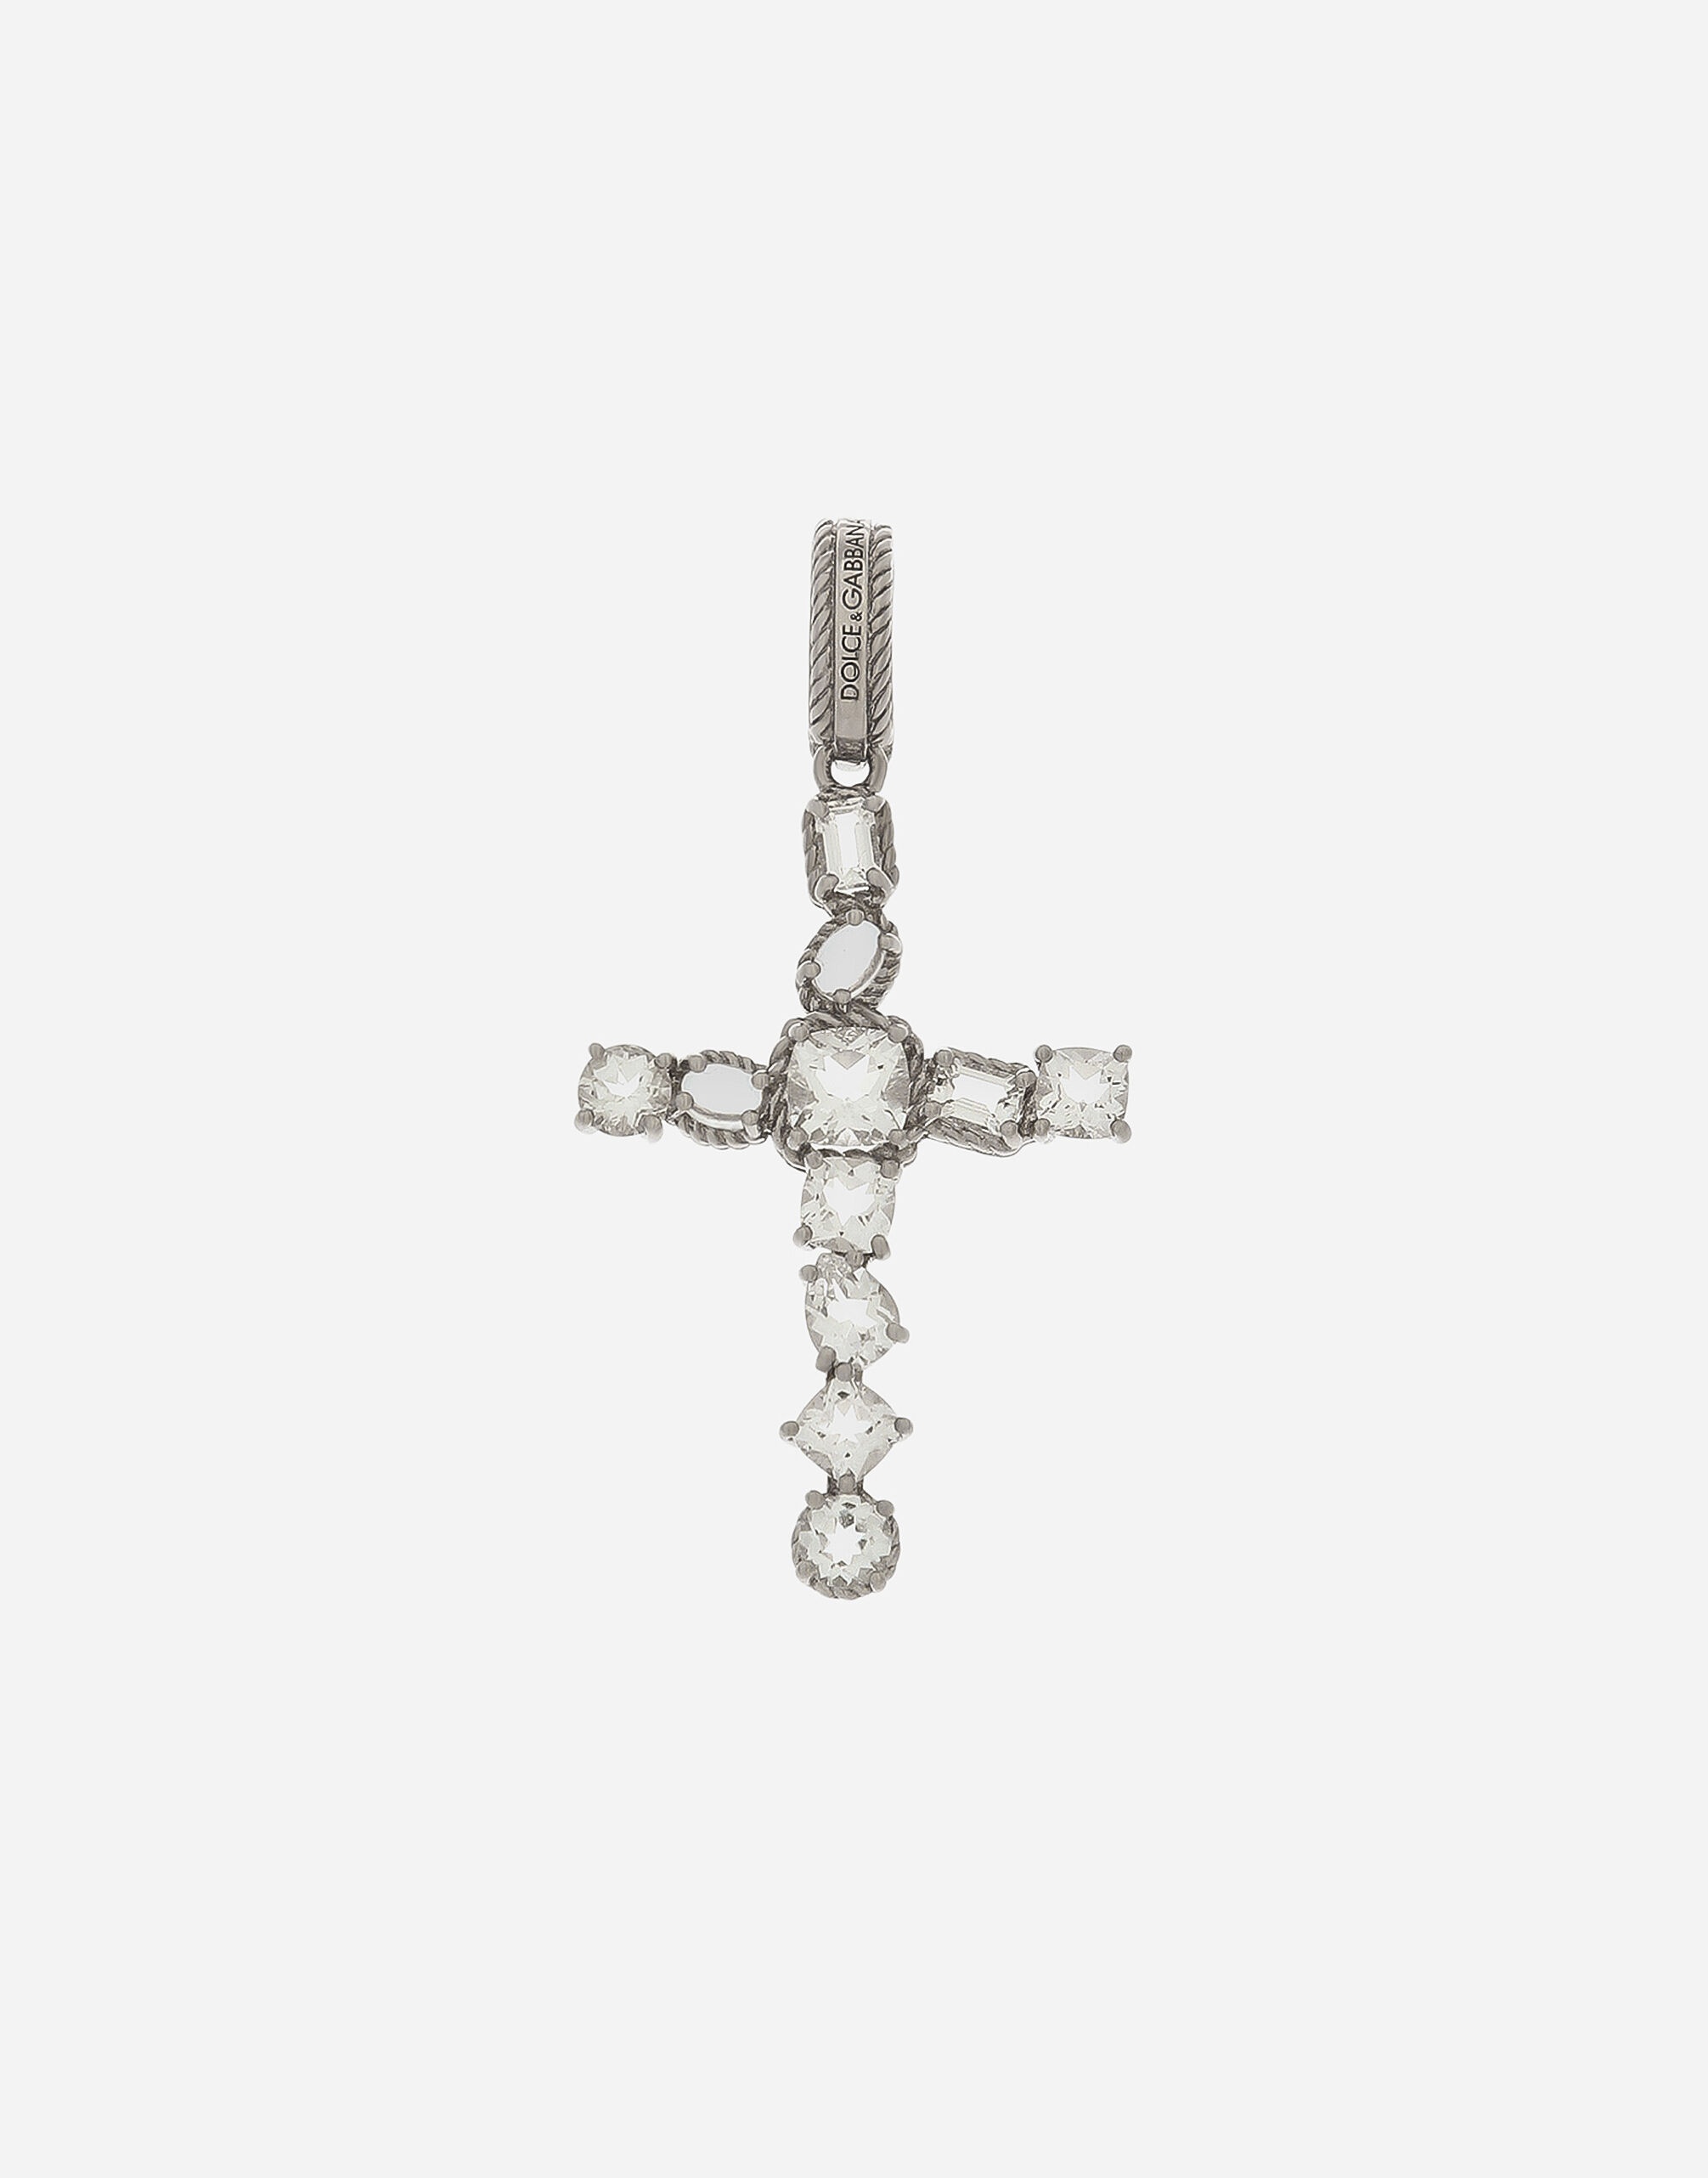 Anna charm in white gold 18Kt and colorless topazes - 1